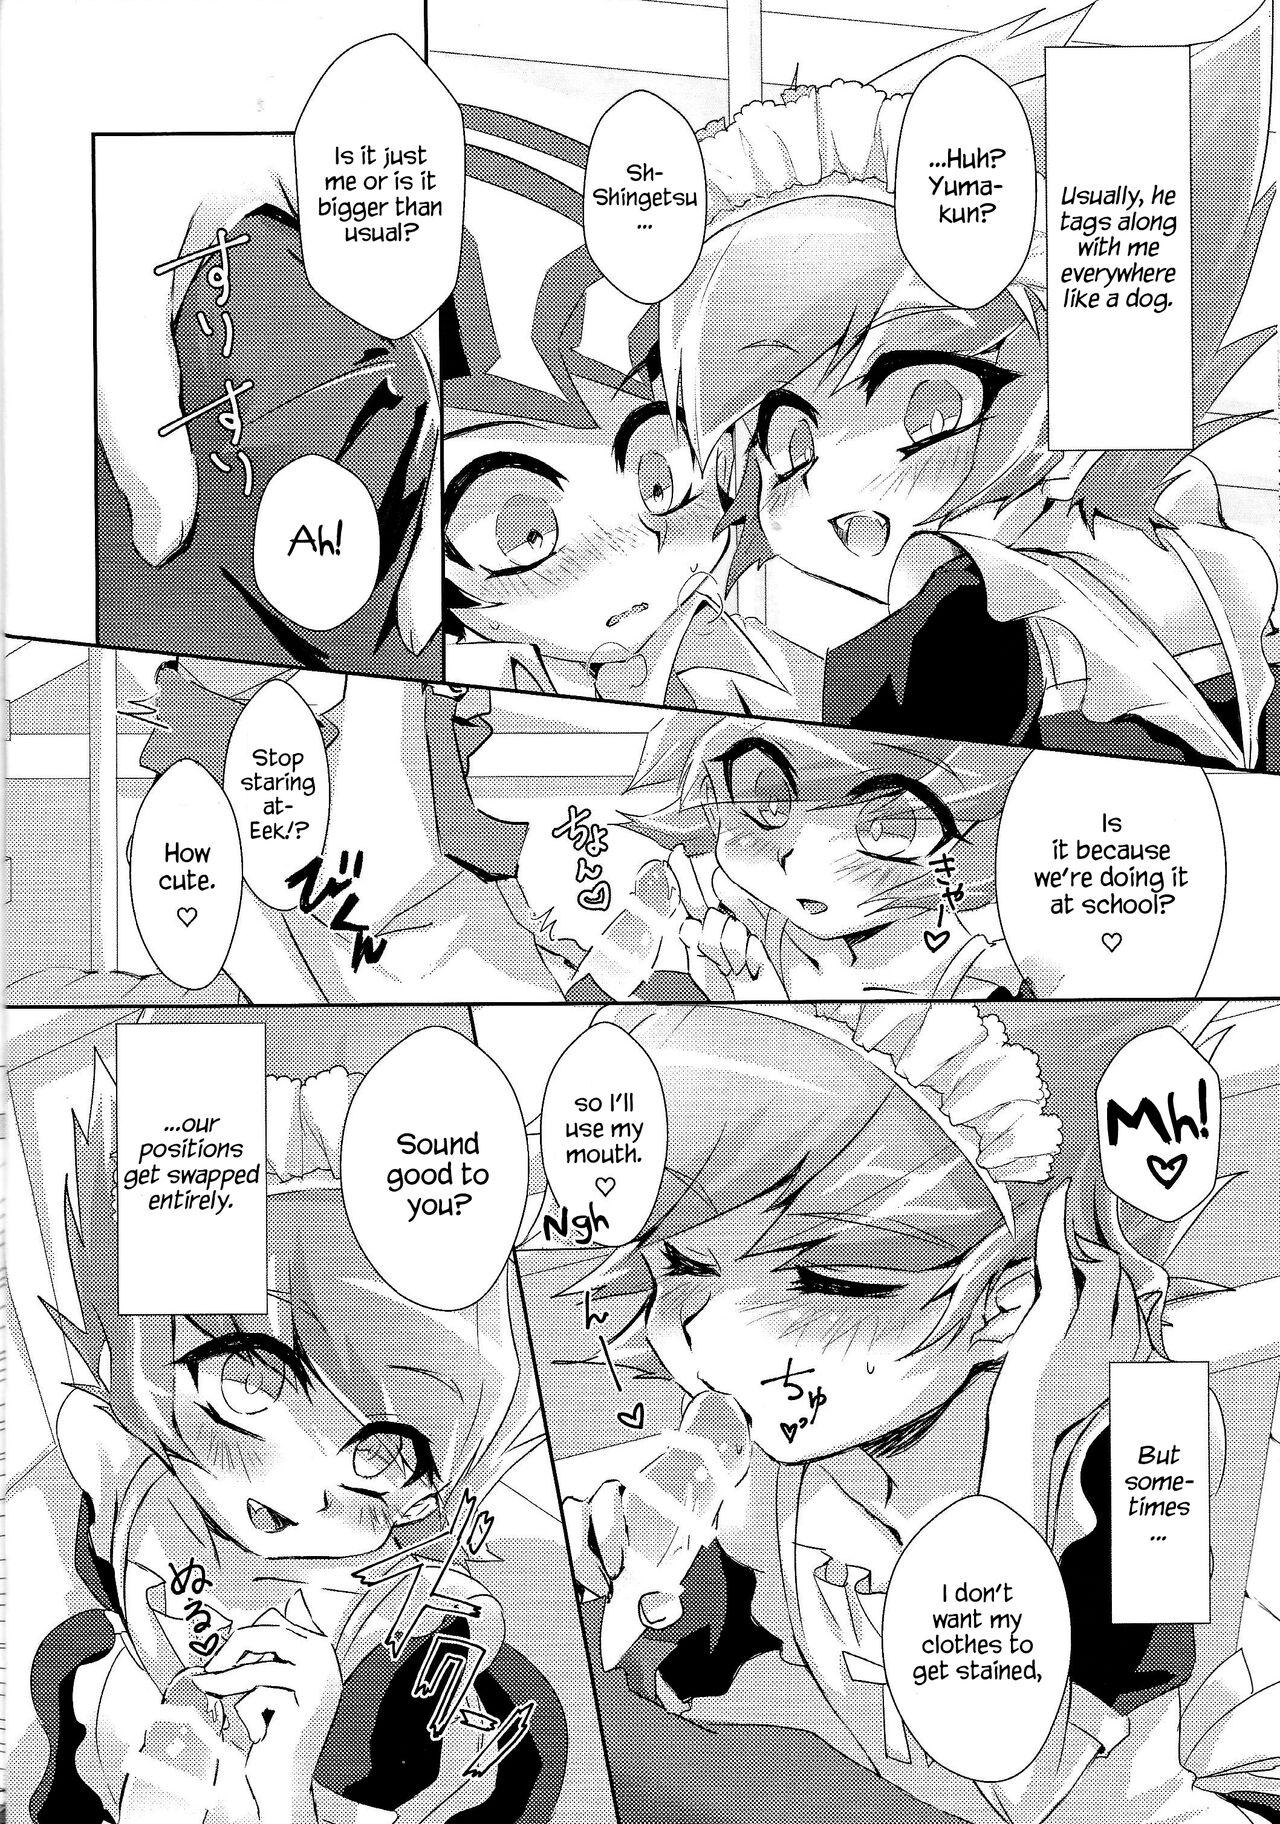 Mistress Stand by me - Yu gi oh zexal Slave - Page 9